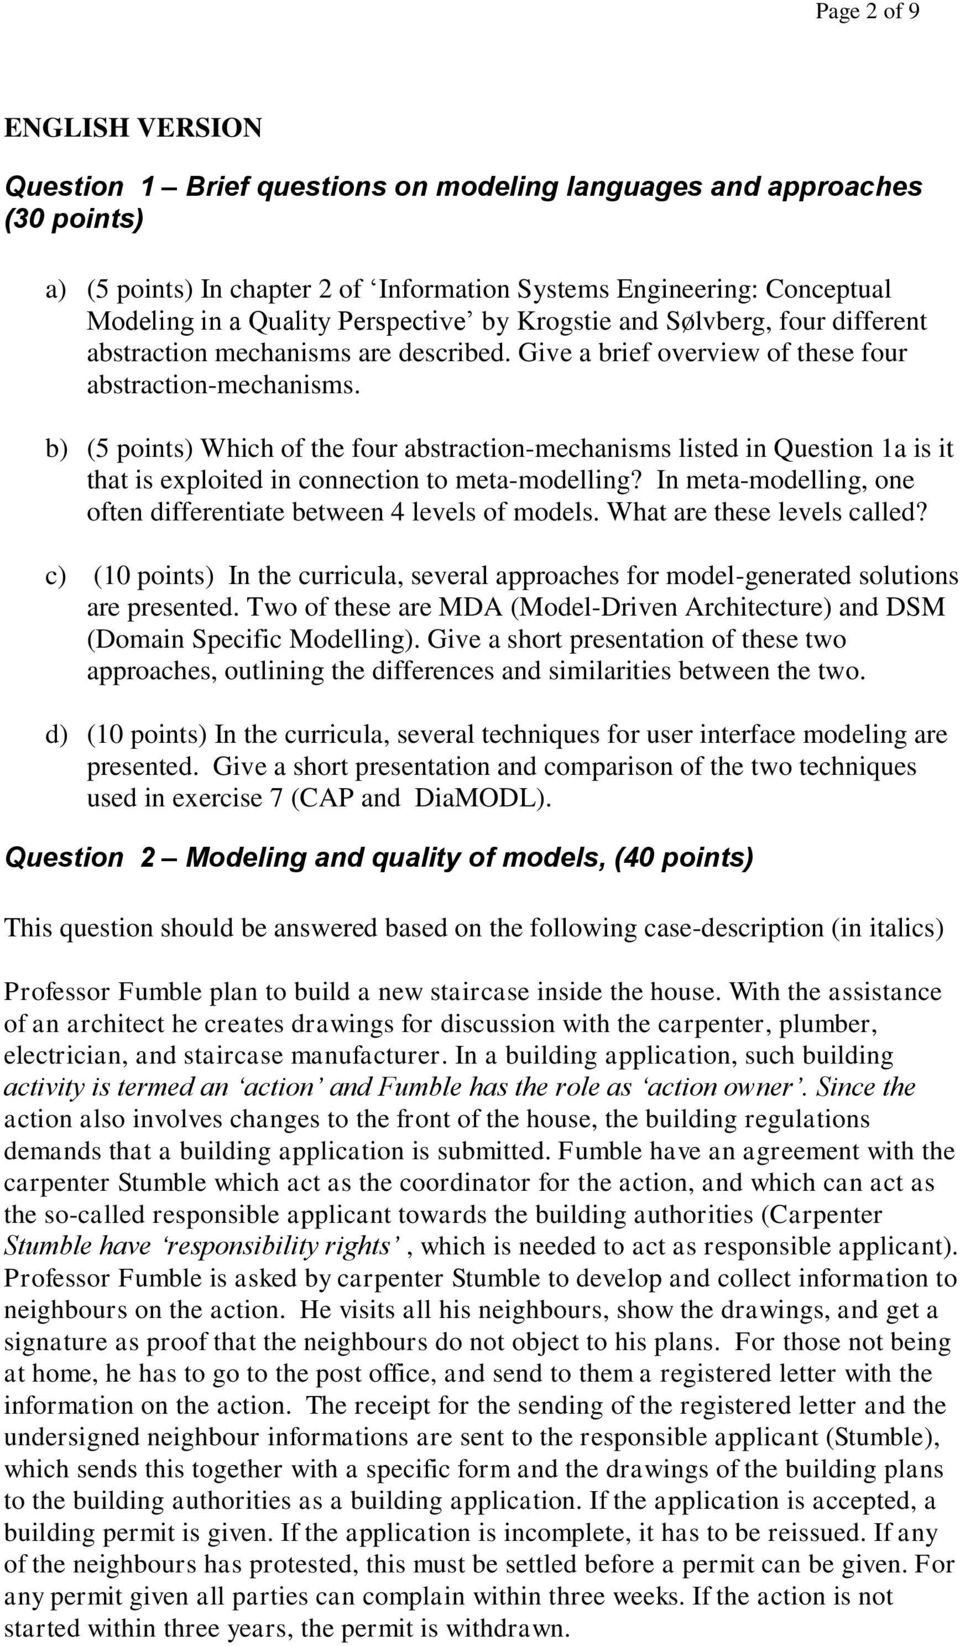 b) (5 points) Which of the four abstraction-mechanisms listed in Question 1a is it that is exploited in connection to meta-modelling?